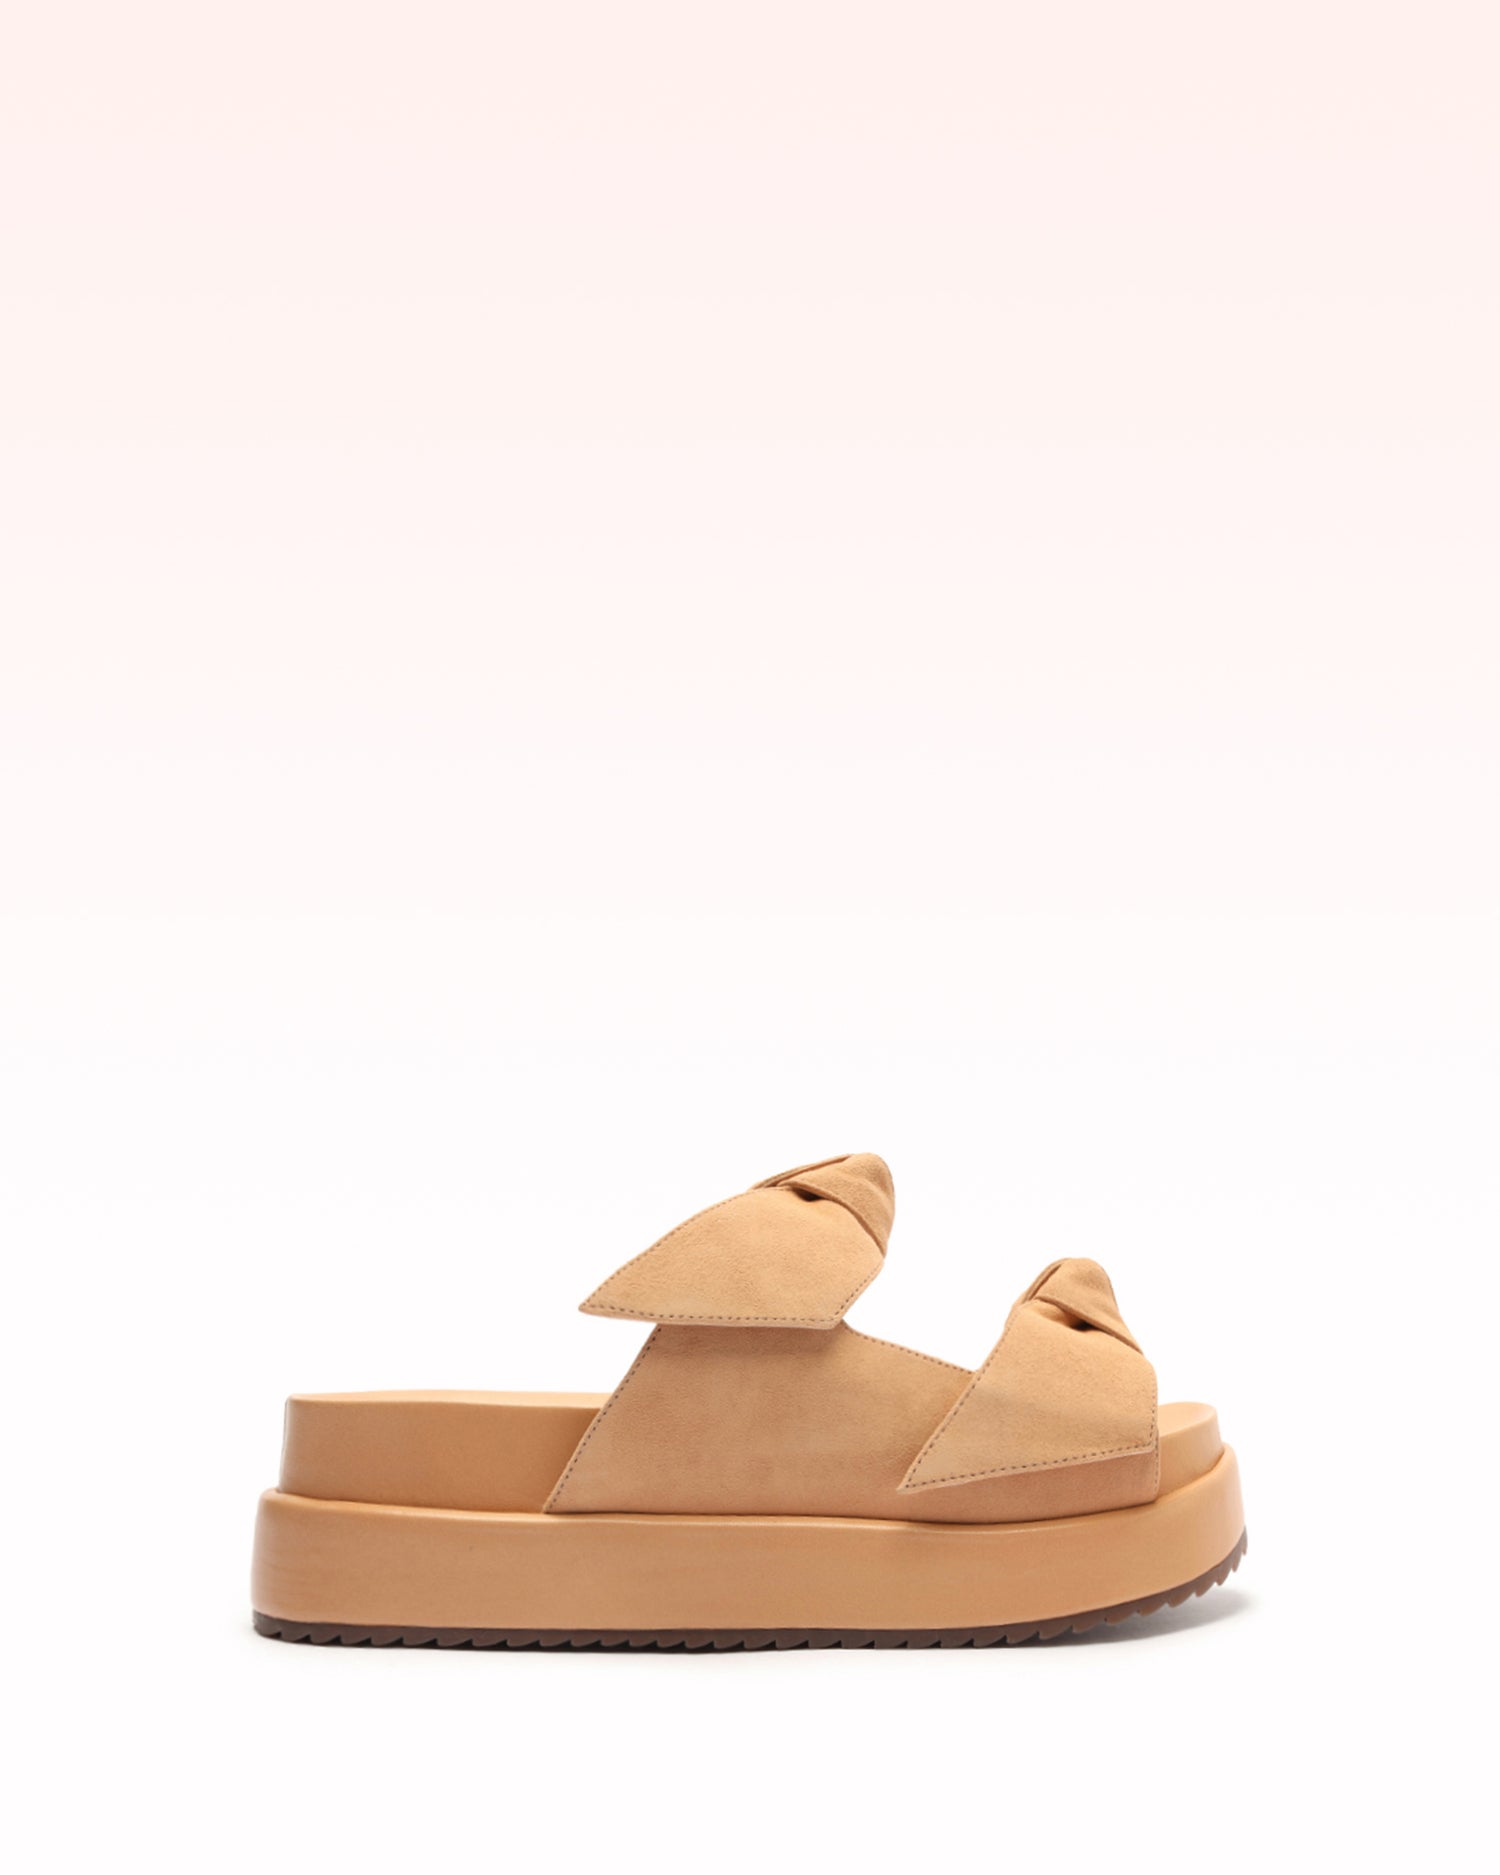 Asymmetric Clarita Bounce Pink Stone Flats Sale 35 Pink Stone Suede & Nappa Leather